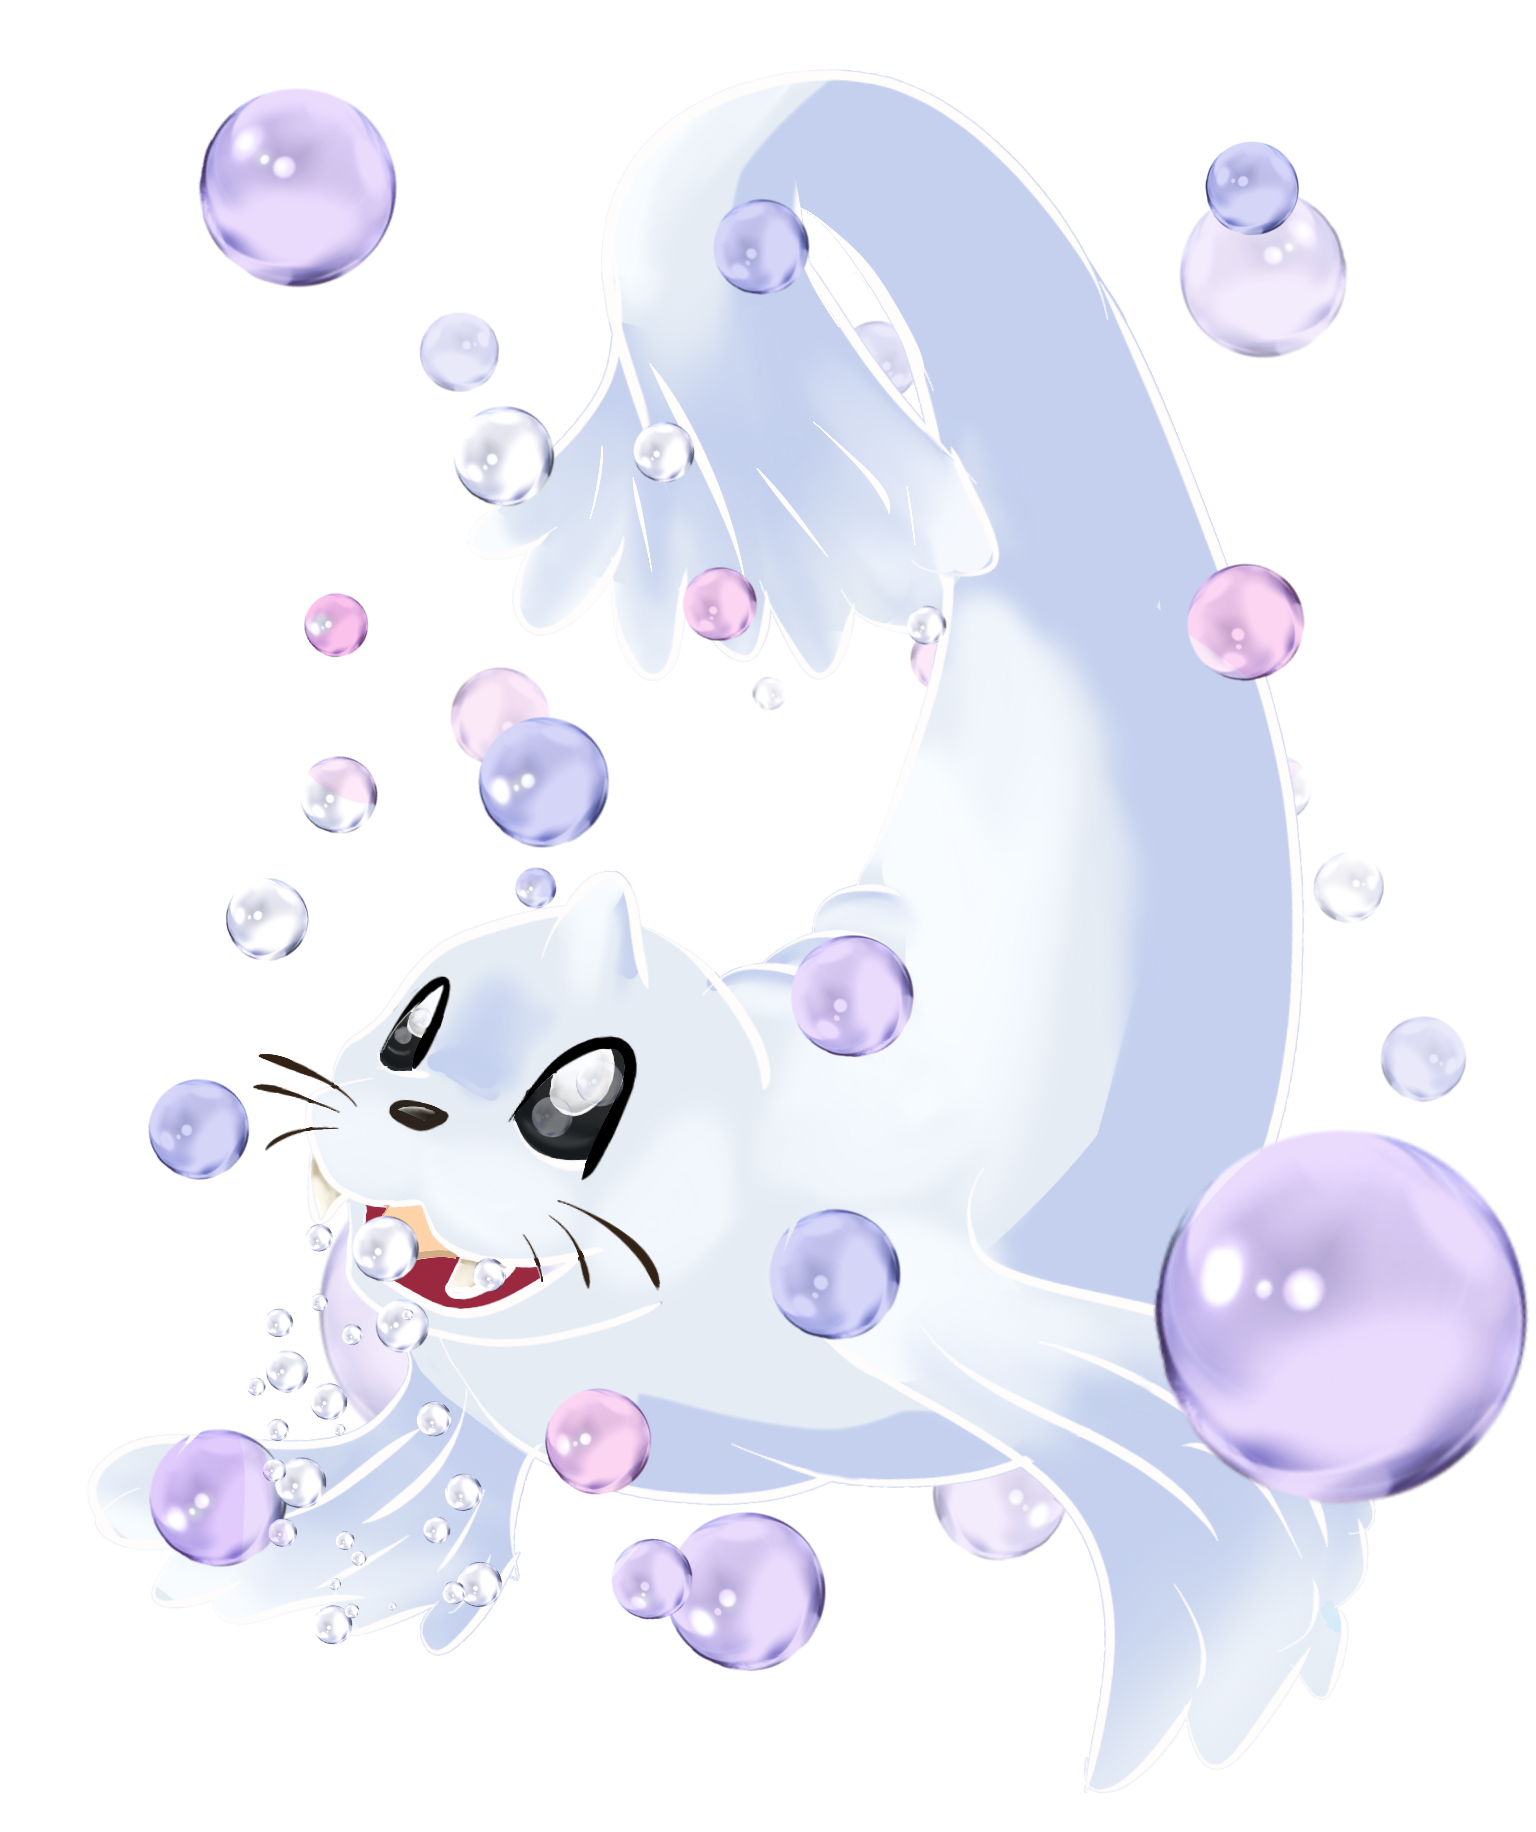 dewgong-used-bubble-beam-by-thewarriorartist